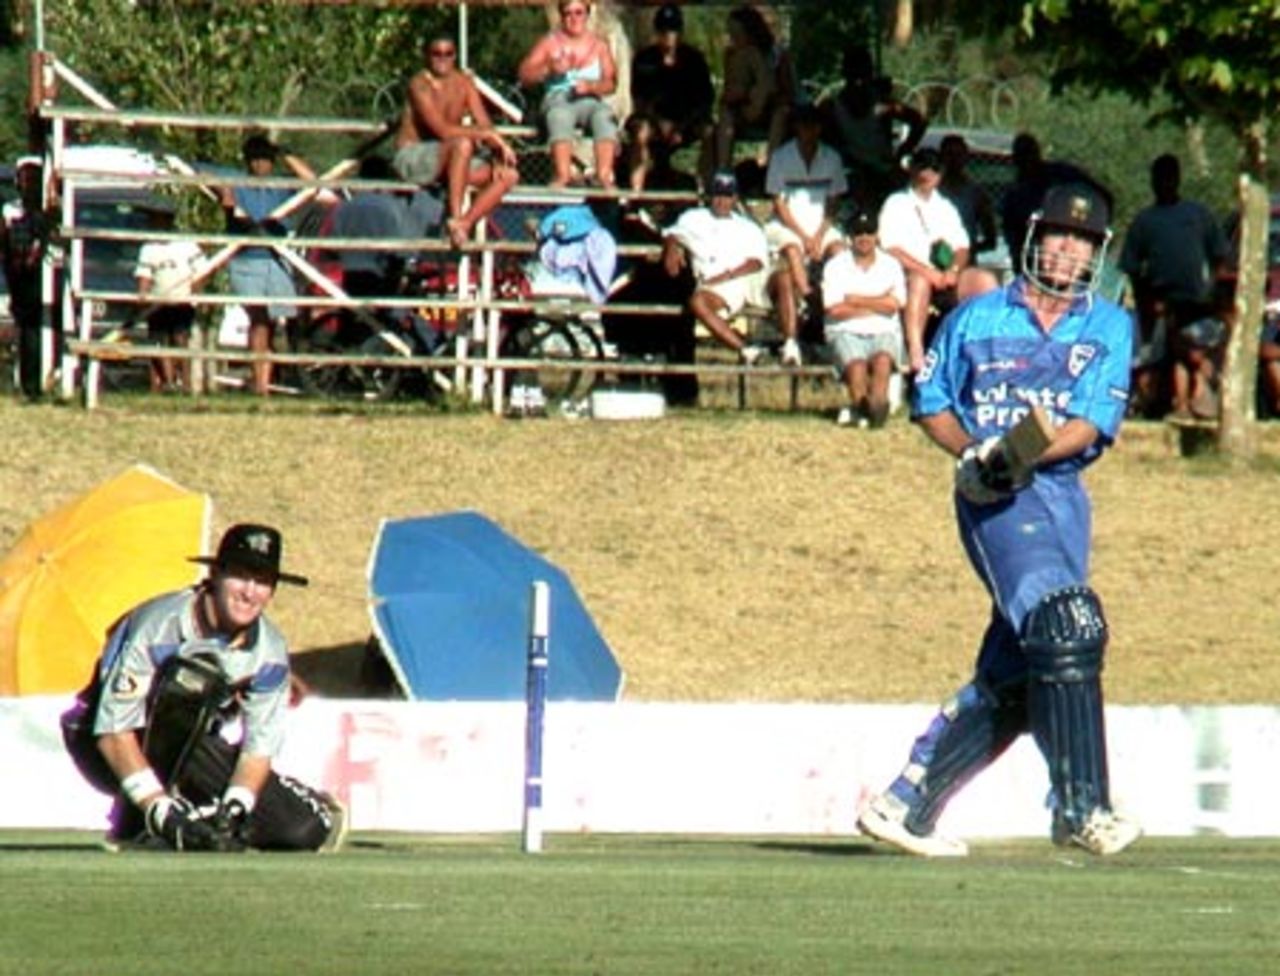 WP's Neil Johnson hooks a short delivery to the square leg boundary against Boland in a Standard Bank Cup match at Paarl on Friday